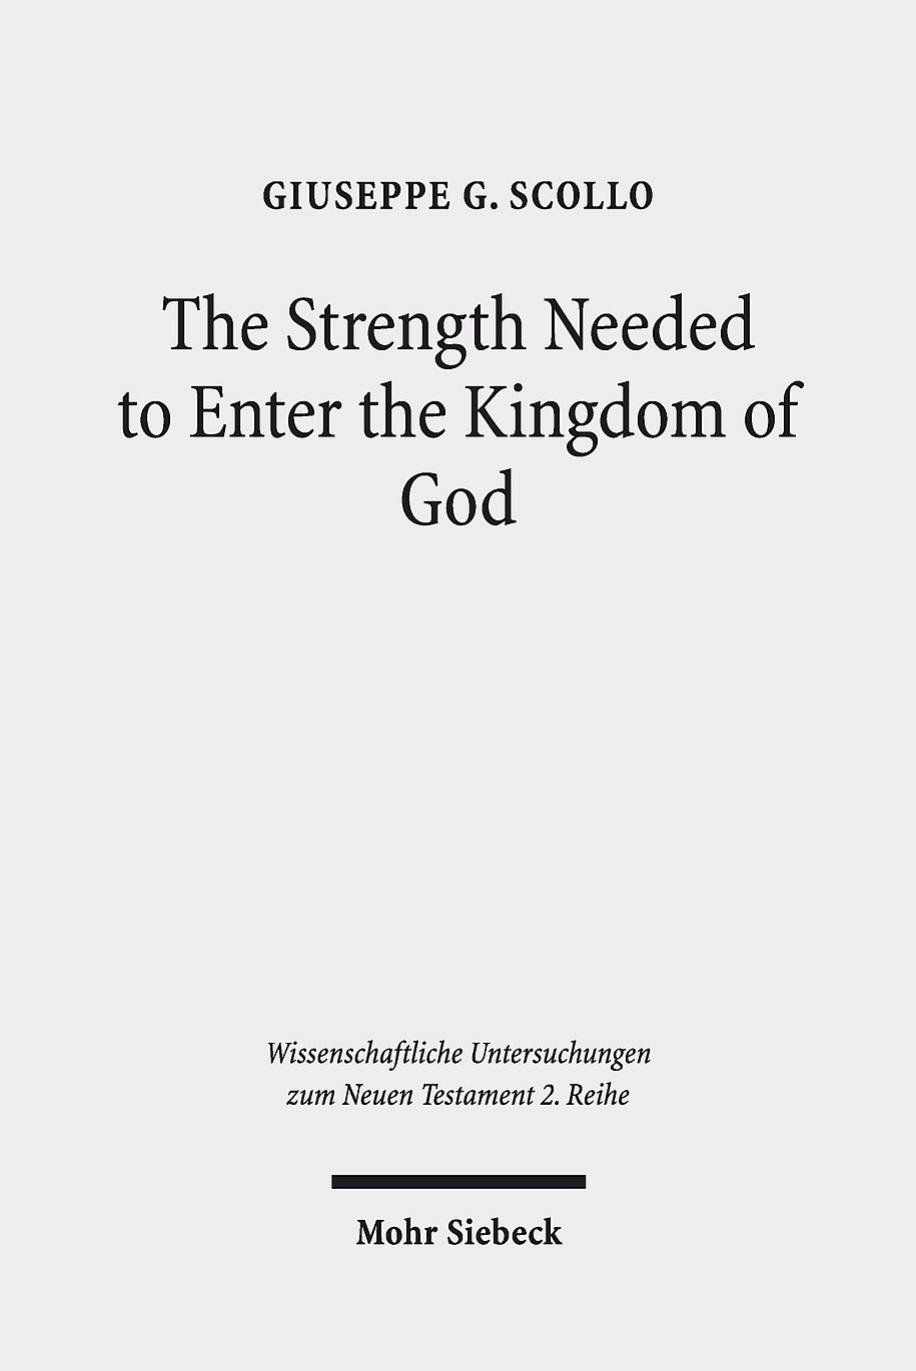 The Strength Needed to Enter the Kingdom of God by Giuseppe G. Scollo